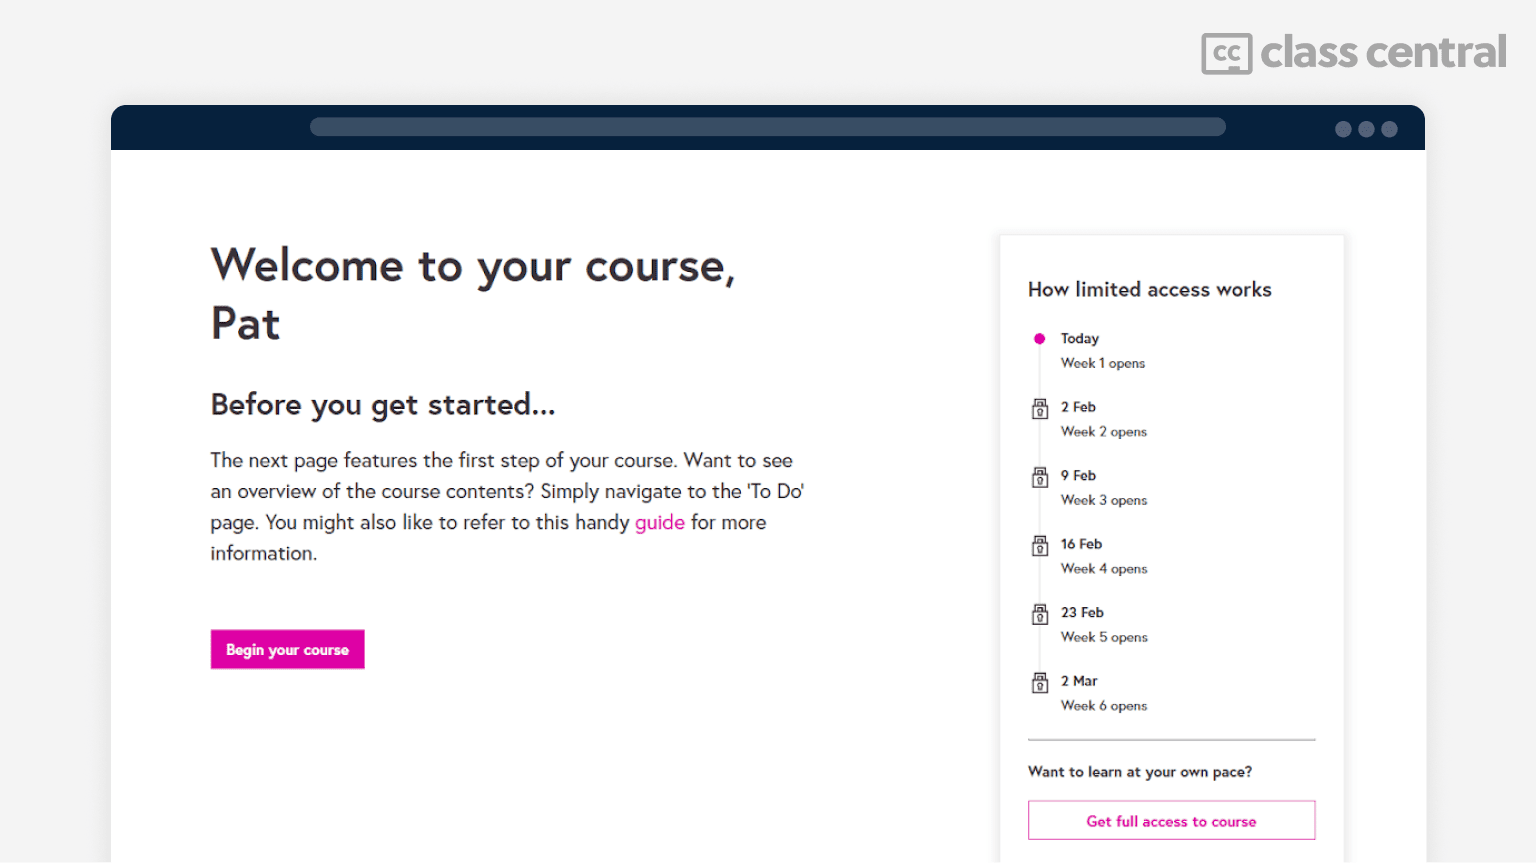 futurelearn-course-material-release-schedule.png